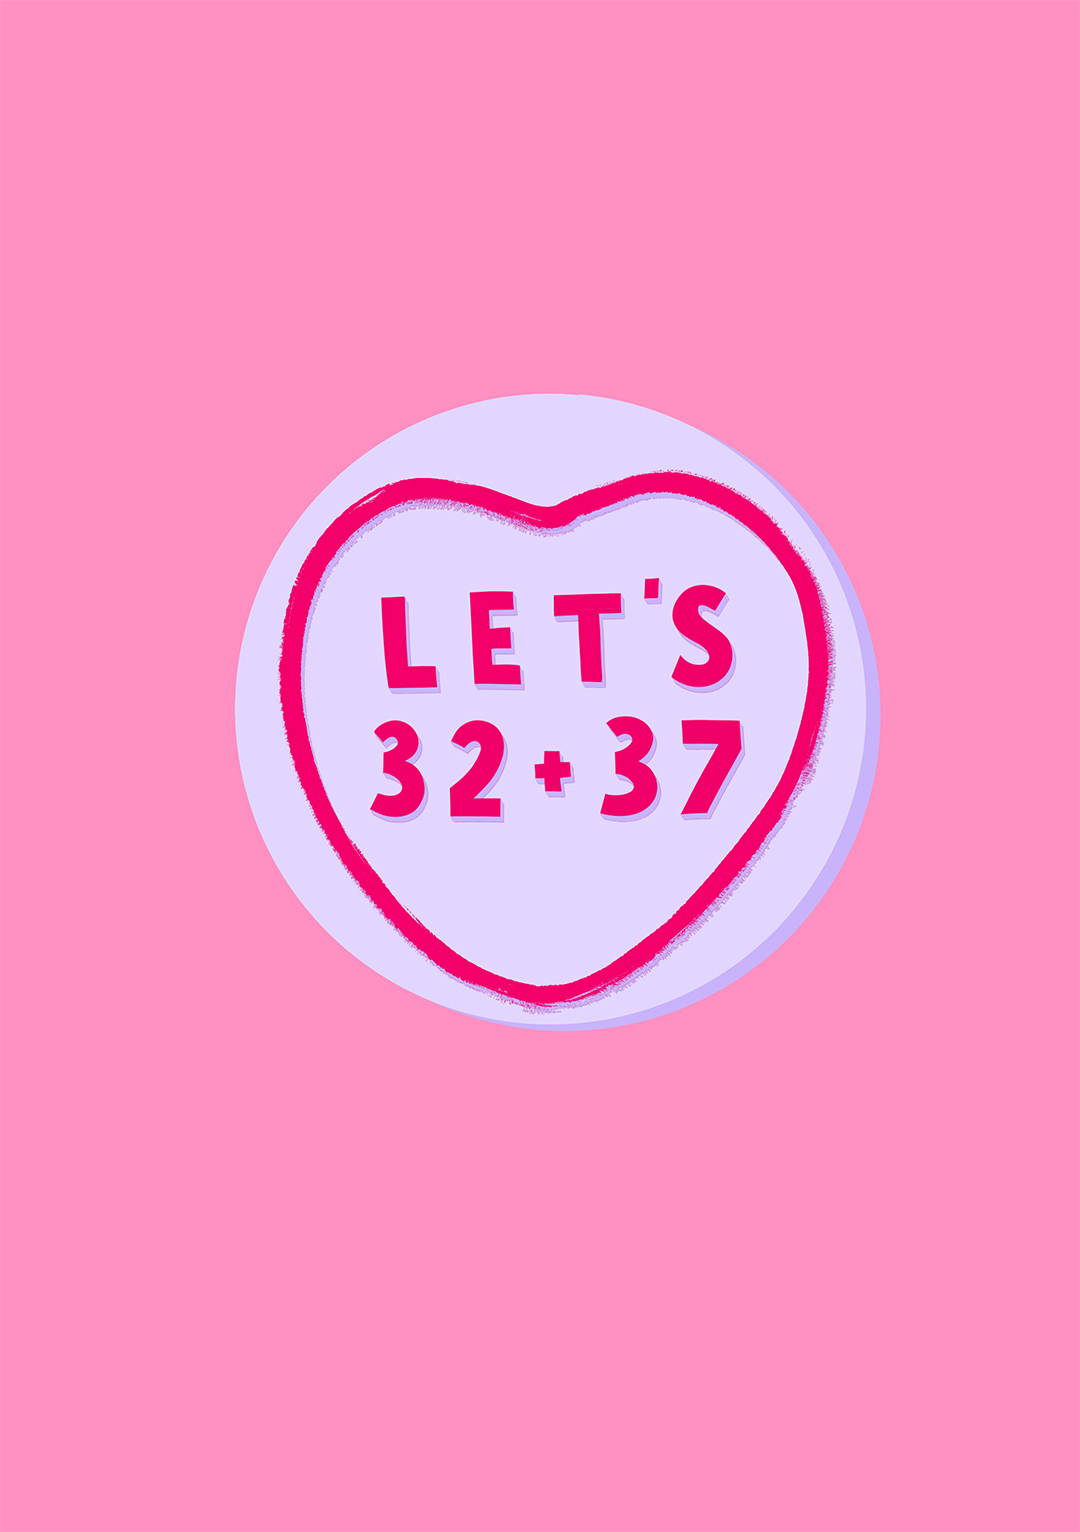 Lets 32+37 - Valentine's Day Card